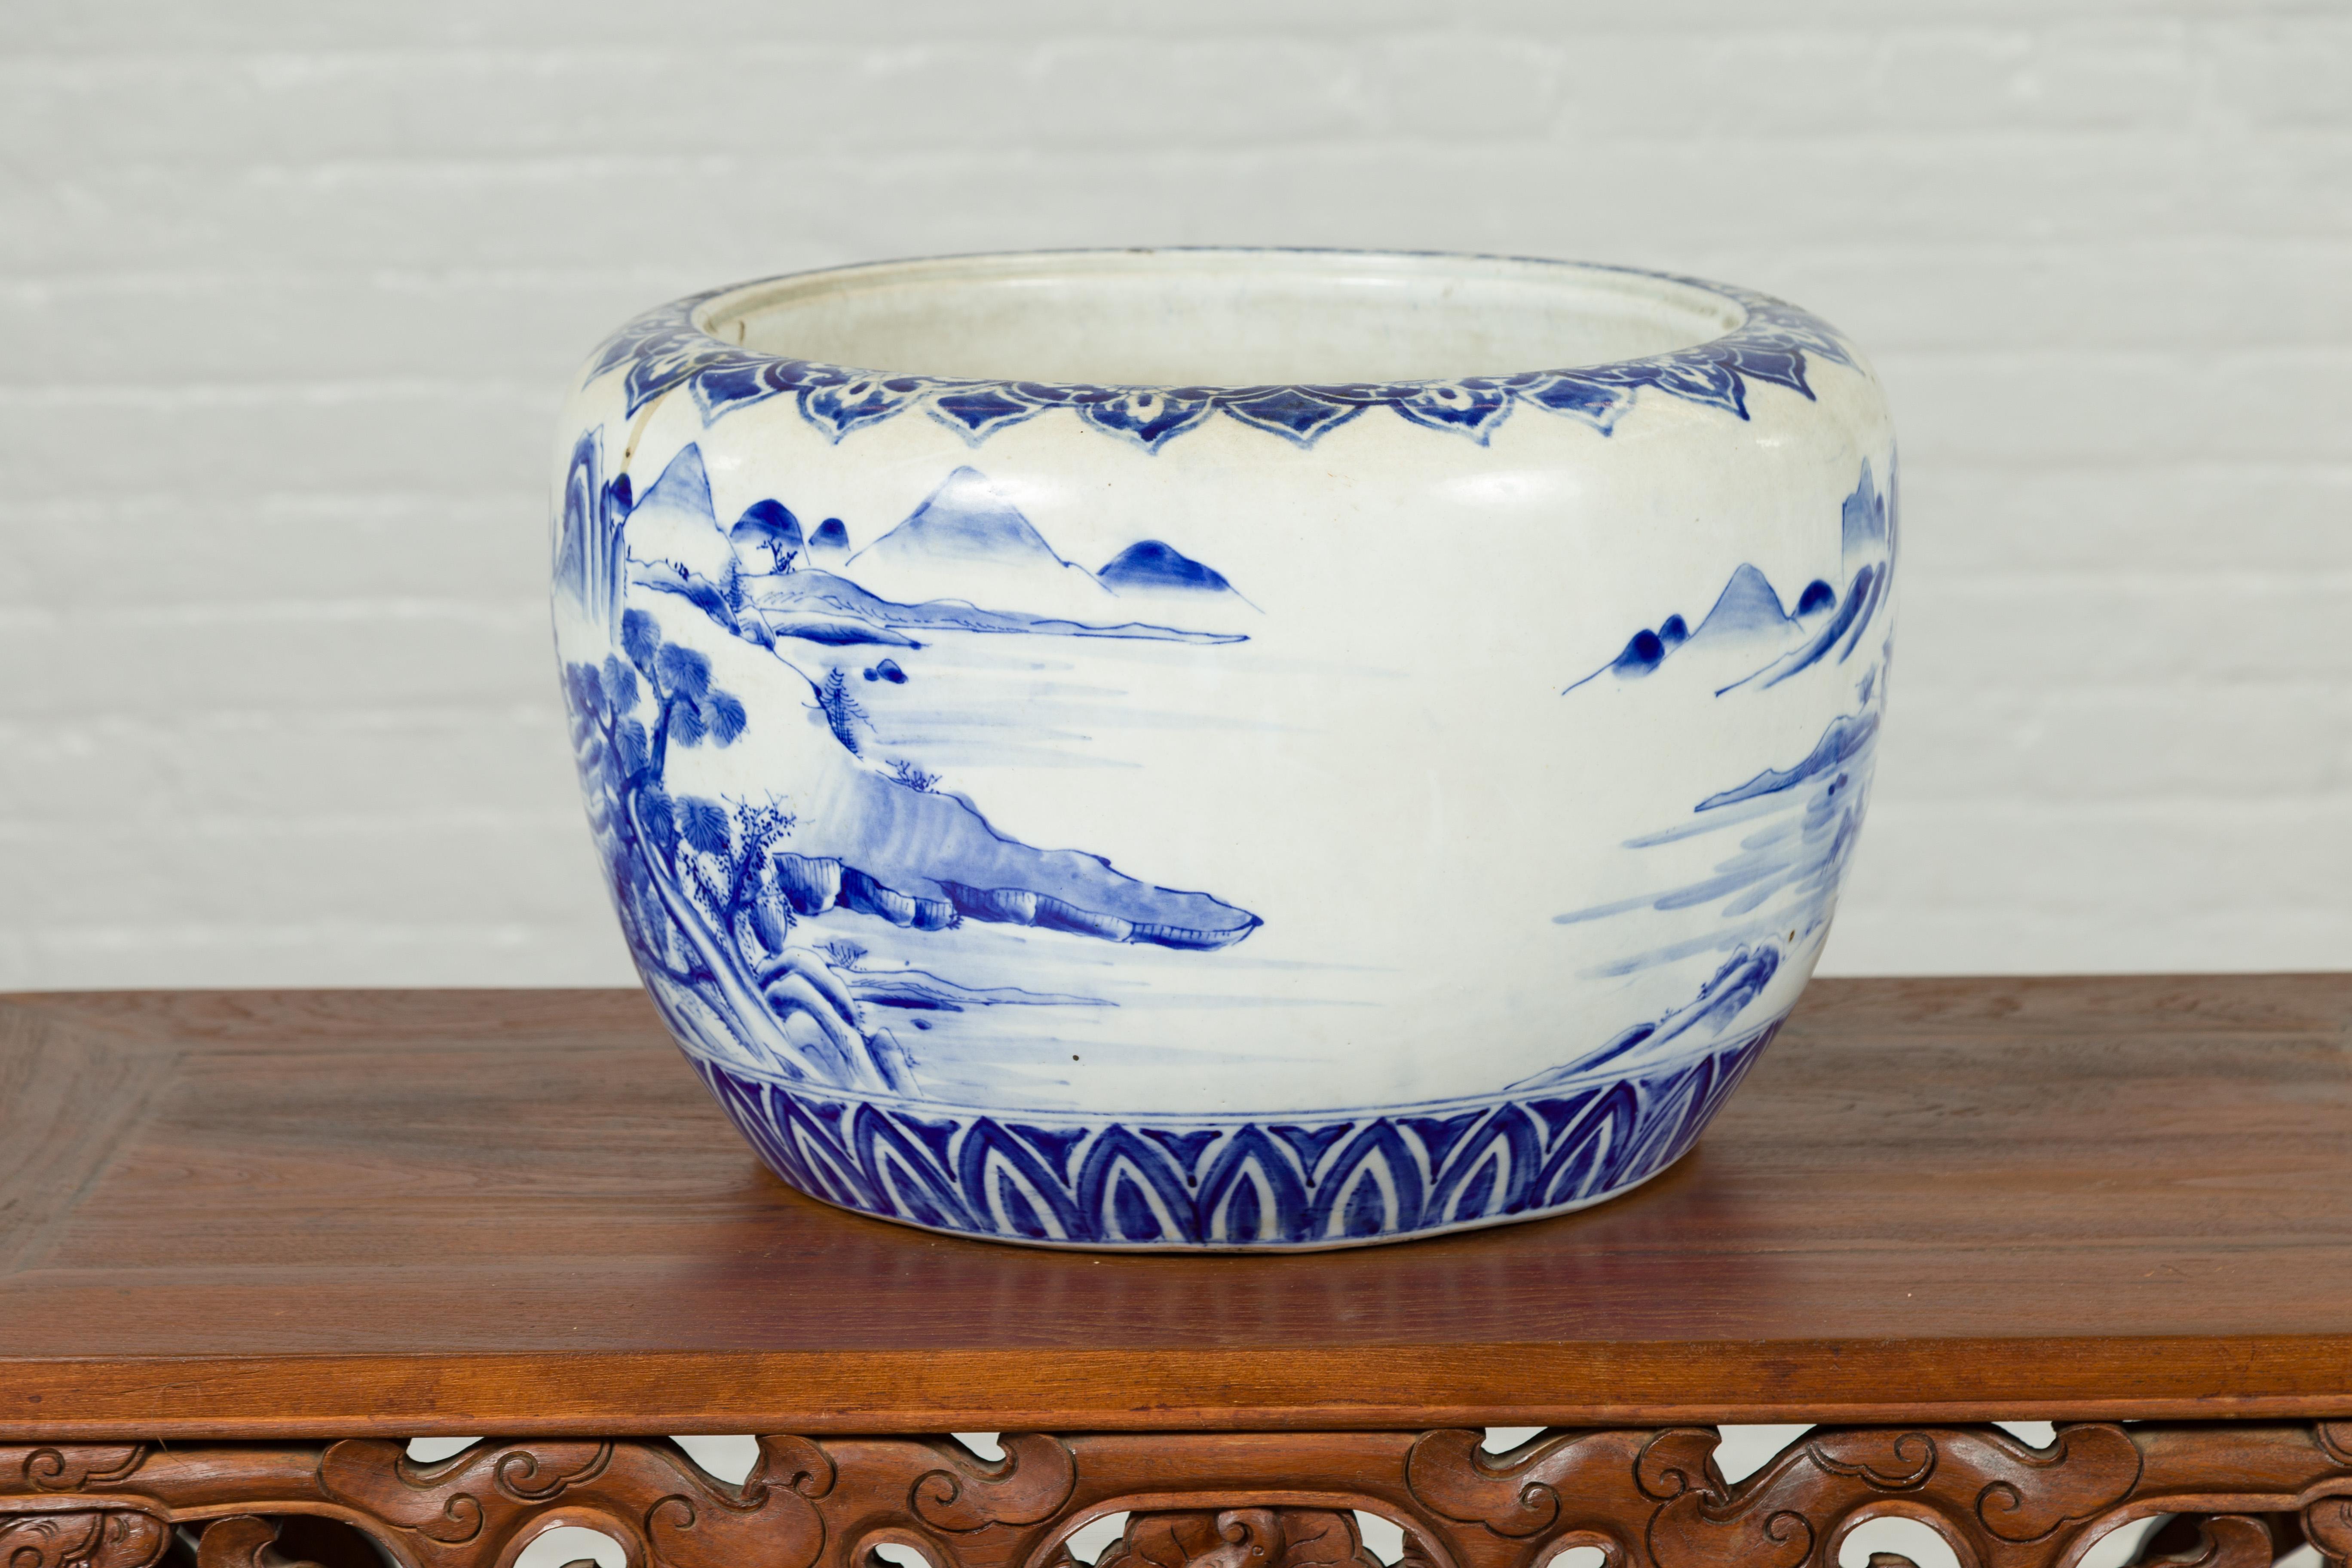 Japanese Meiji Period 19th Century Blue and White Round Porcelain Planter For Sale 5